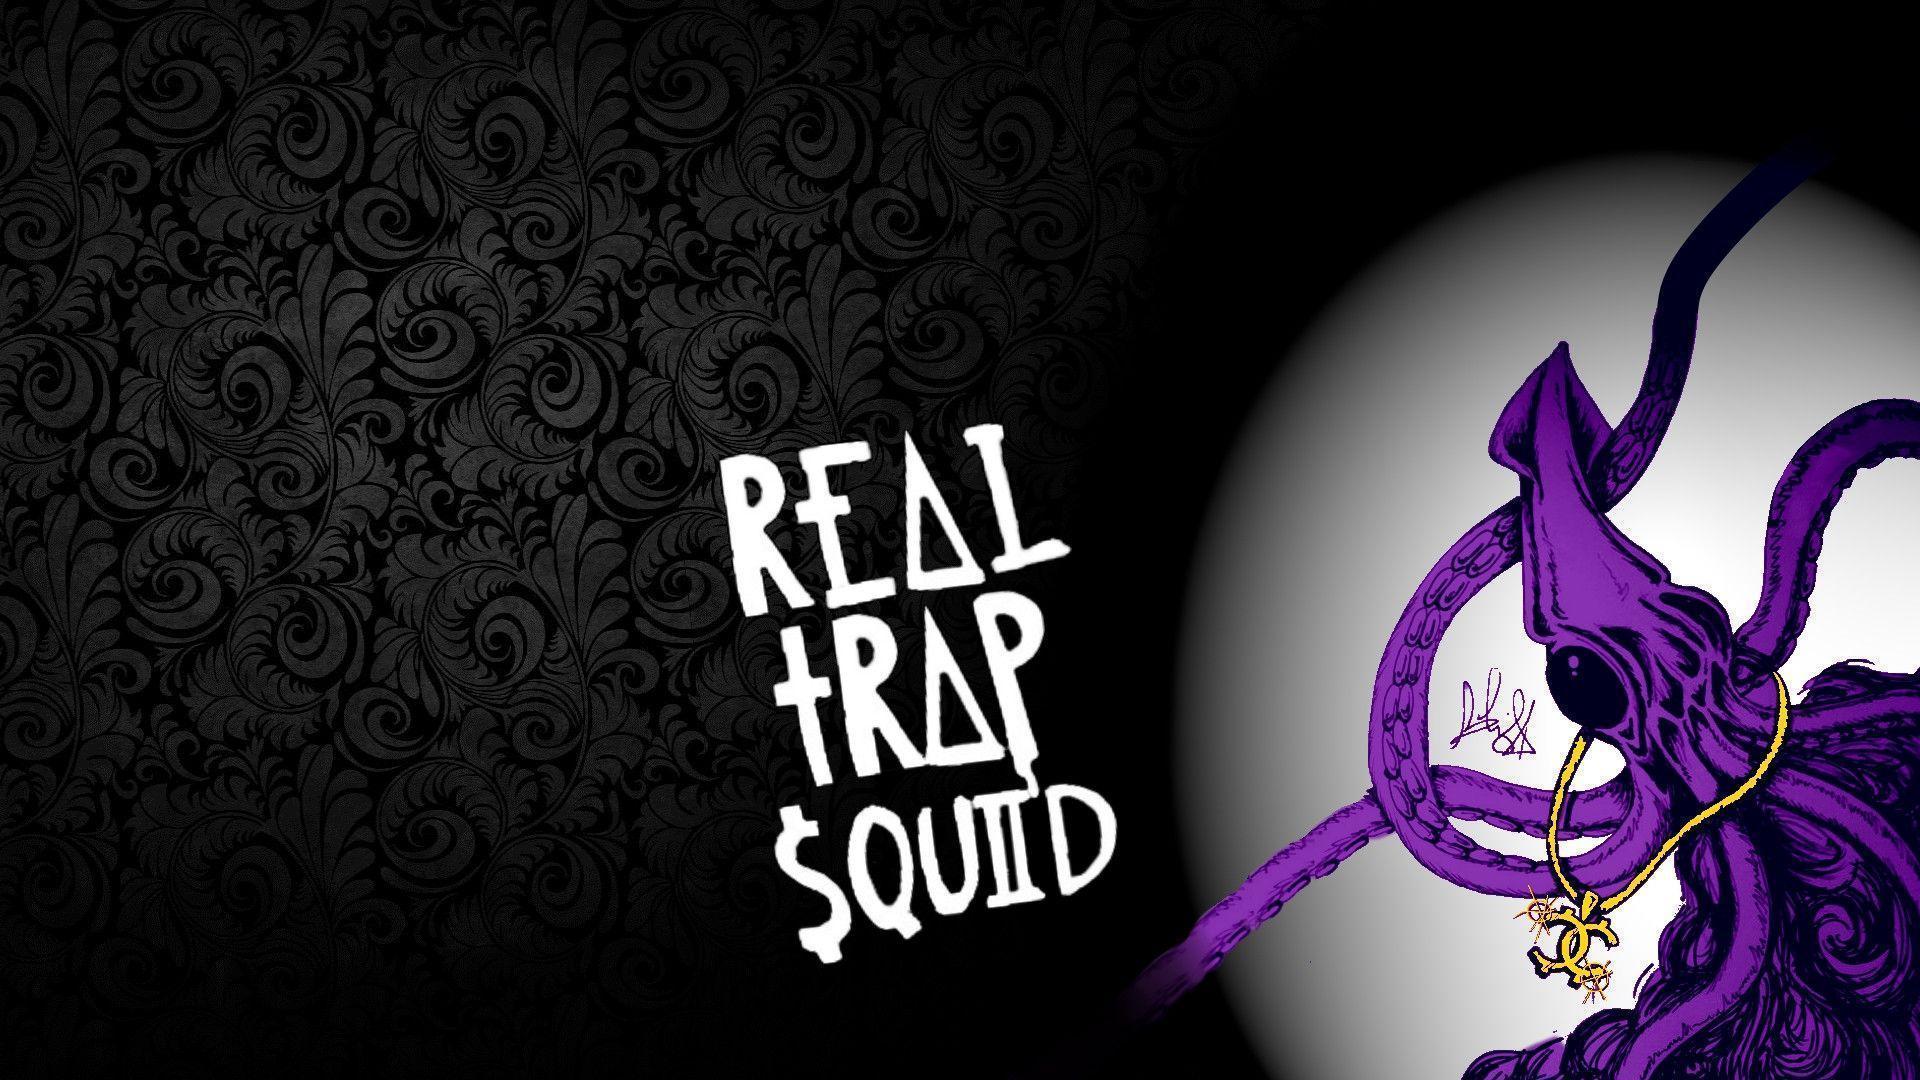 Made A 1920x1080 Wallpaper Of The Trap Squid. R Wallpaper Showed